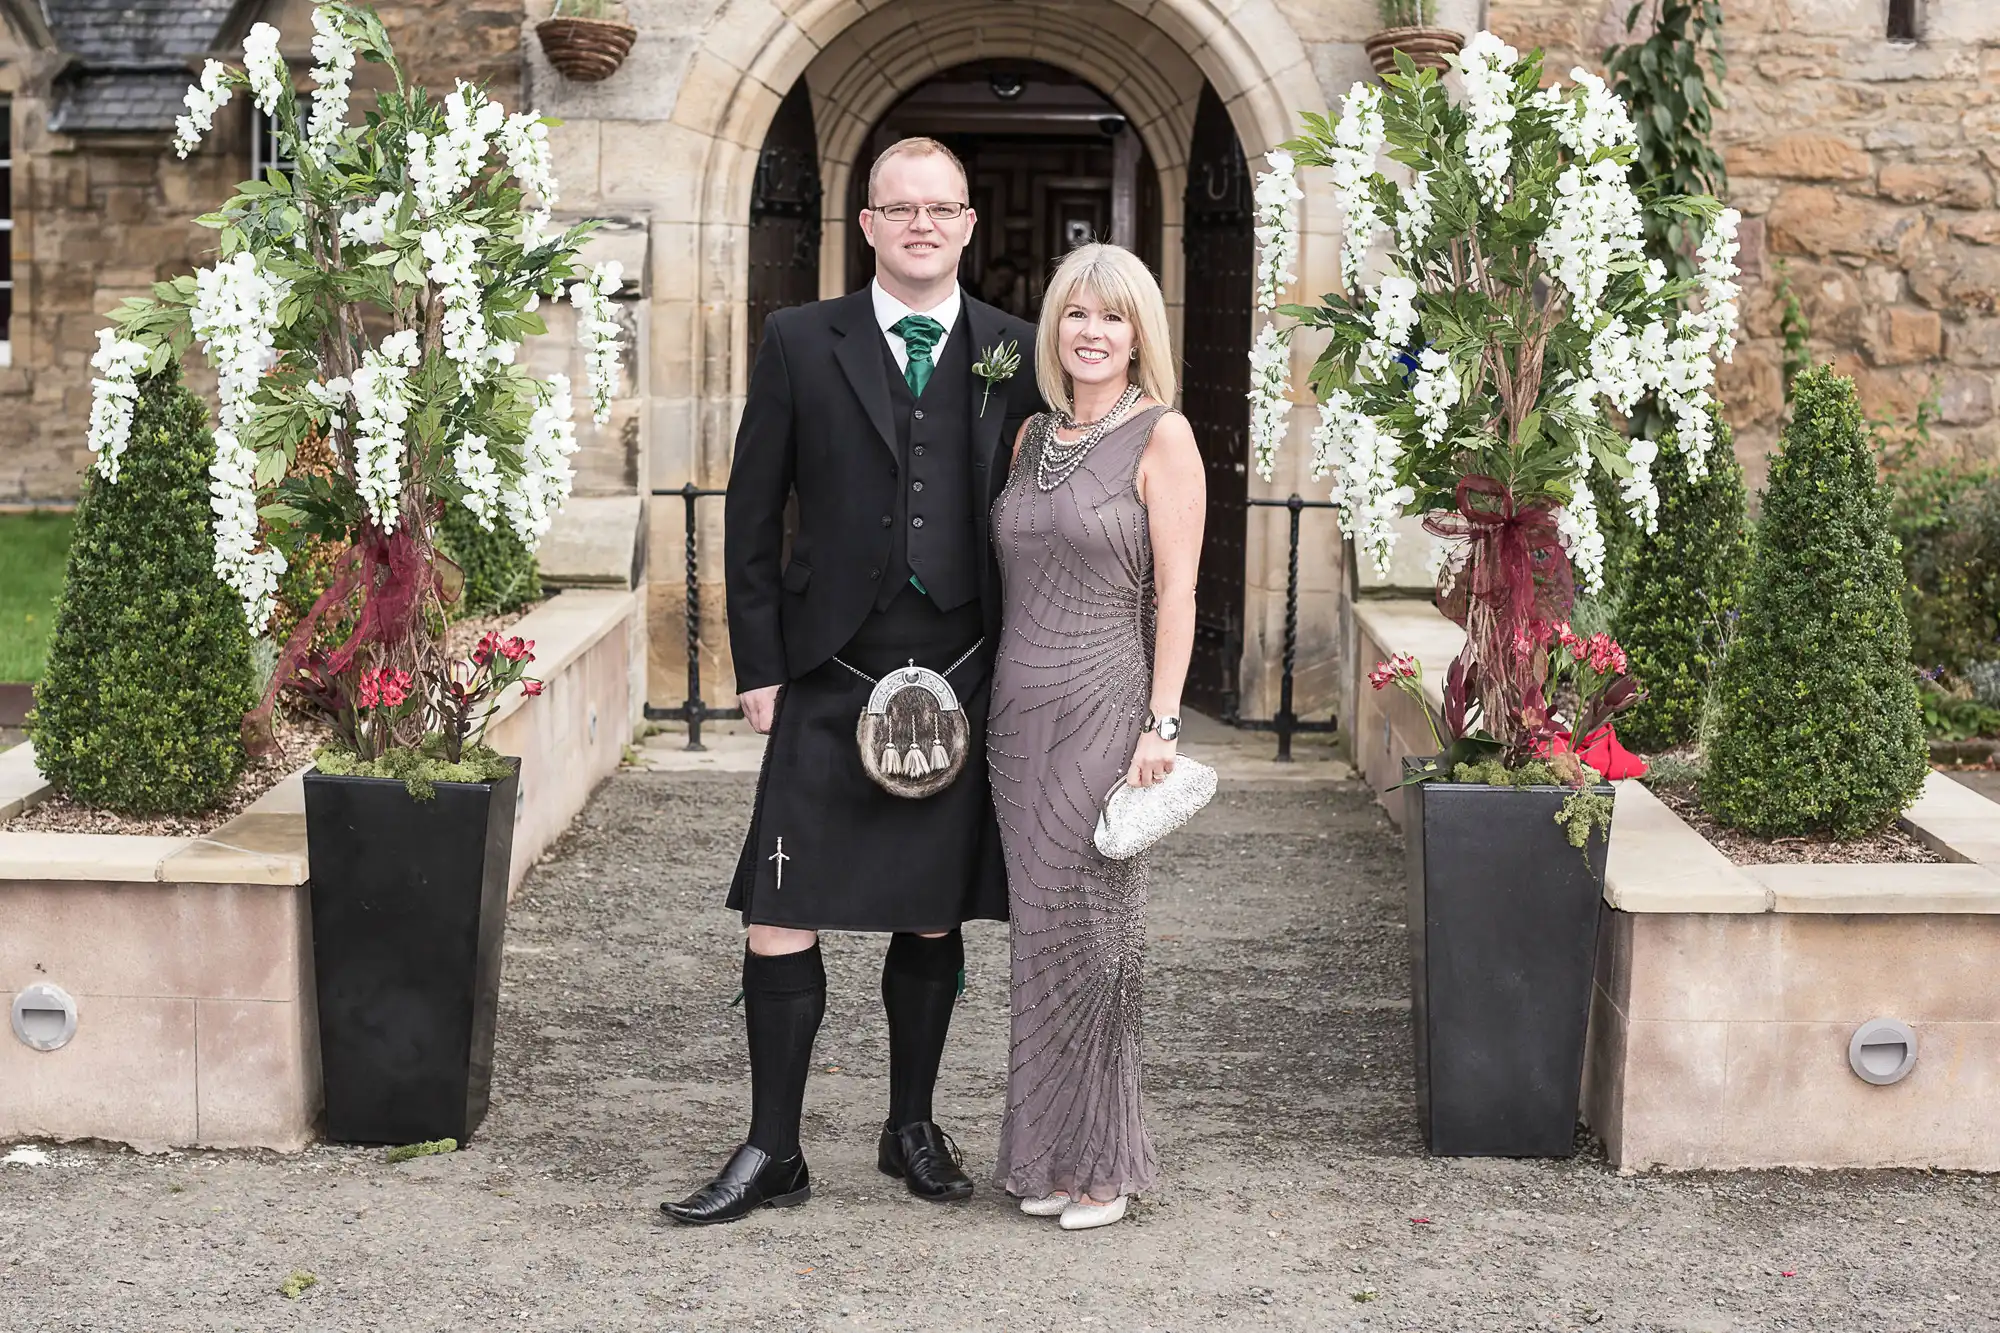 A couple dressed formally, the man in a kilt and the woman in a long taupe dress, standing in front of a church entrance, both smiling.